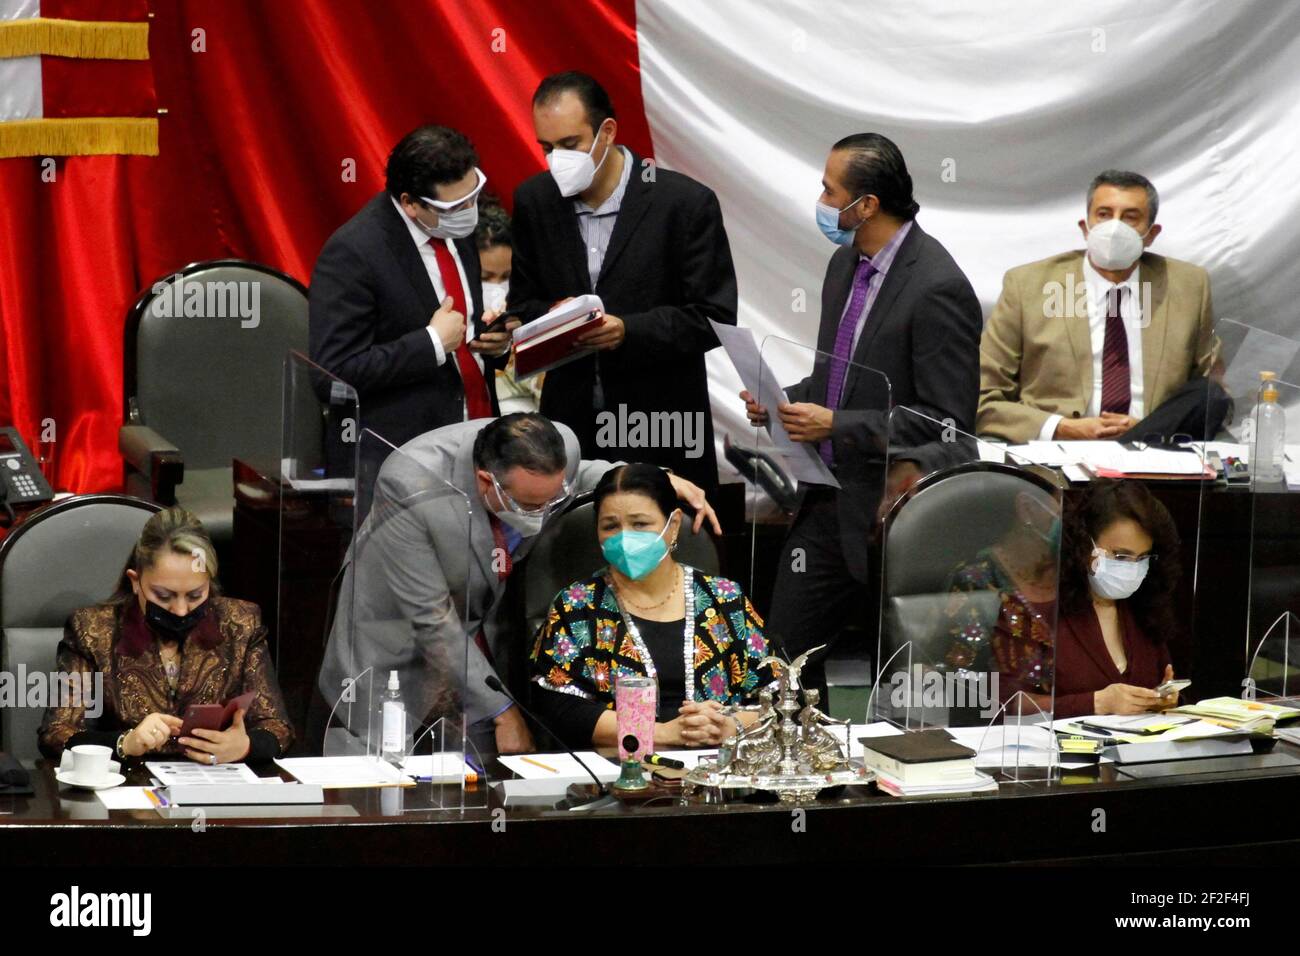 MEXICO CITY, MEXICO . MARCH 9:The president of the Board of Directors of the Chamber of Deputies of Mexico, Dulce Maria Sauri Riancho, uses mask to prevent recontagiarization of the Covid19 virus. On December 20, 2020, the federal deputy of the Institutional Revolutionary Party reported that the SARS-COV2 coronavirus was positive. On March 9, 2021 in Mexico City, Mexico. Credit: Luis Barron/Eyepix Group/The Photo Access Stock Photo